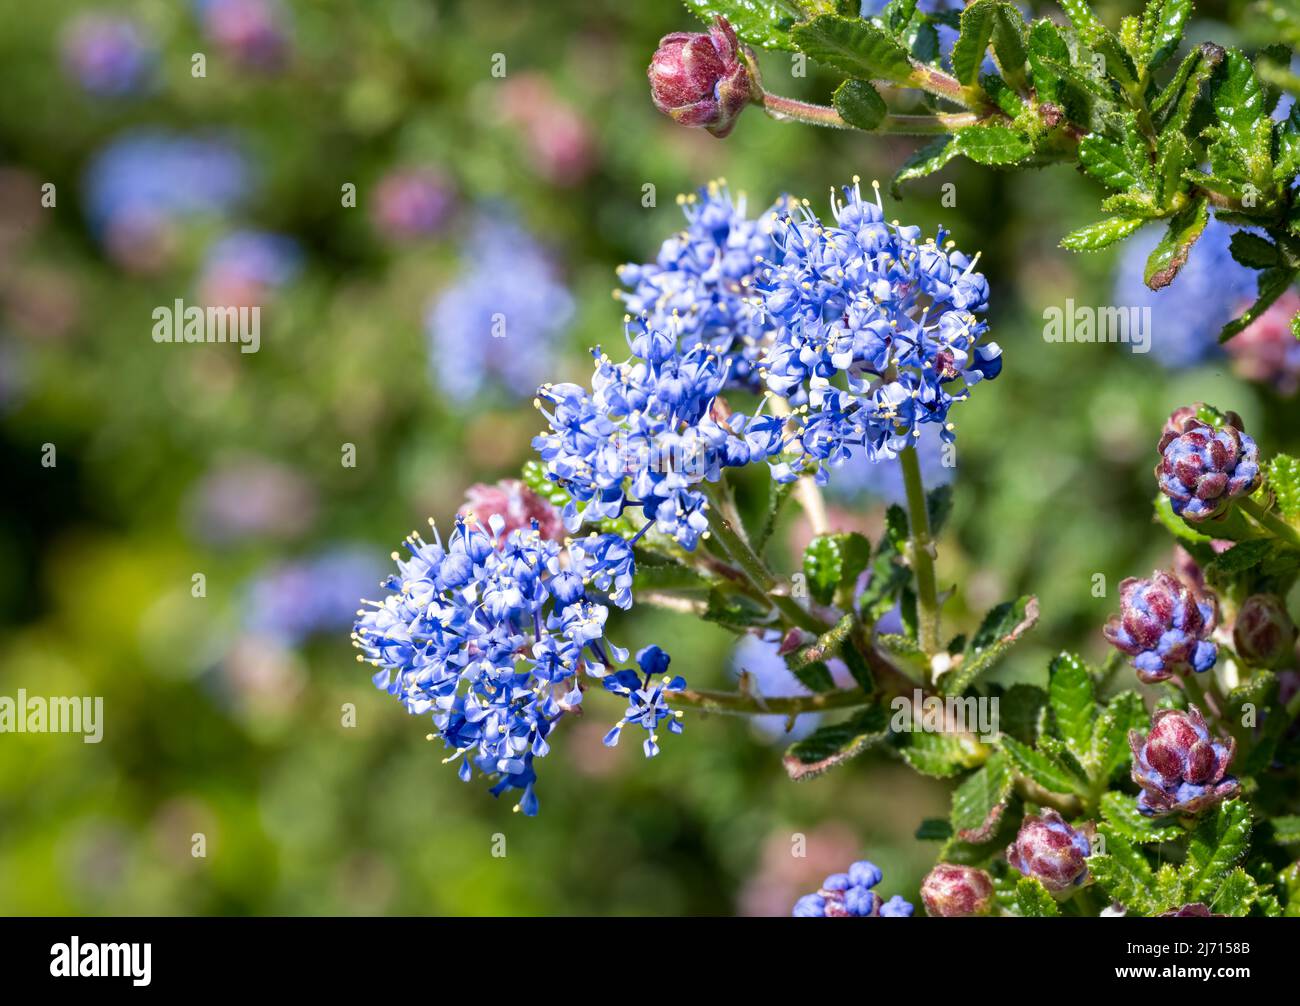 Close up of a cluster of the beautiful blue flowers of an evergreen Ceanothus shrub (Ceanothus Concha). Stock Photo